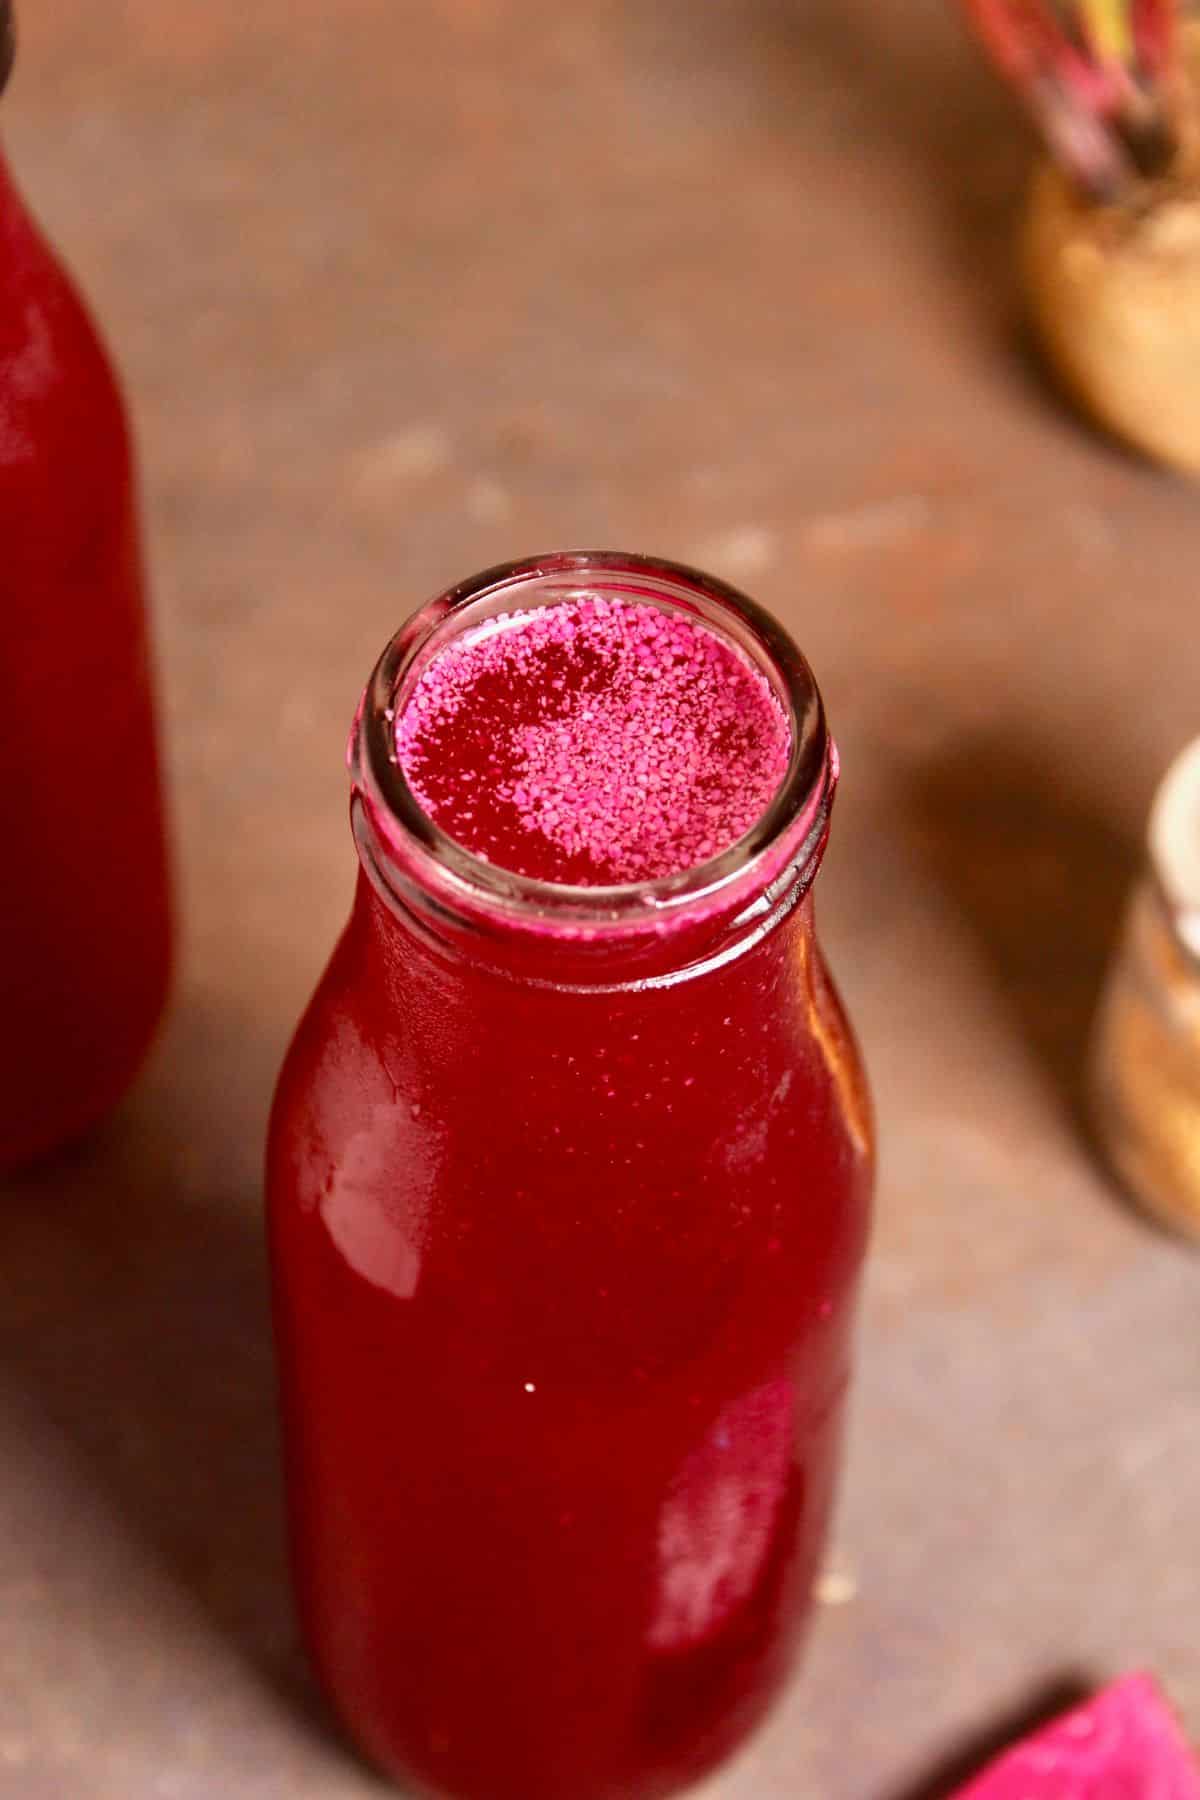 yummy carrot and beetroot probiotic drink